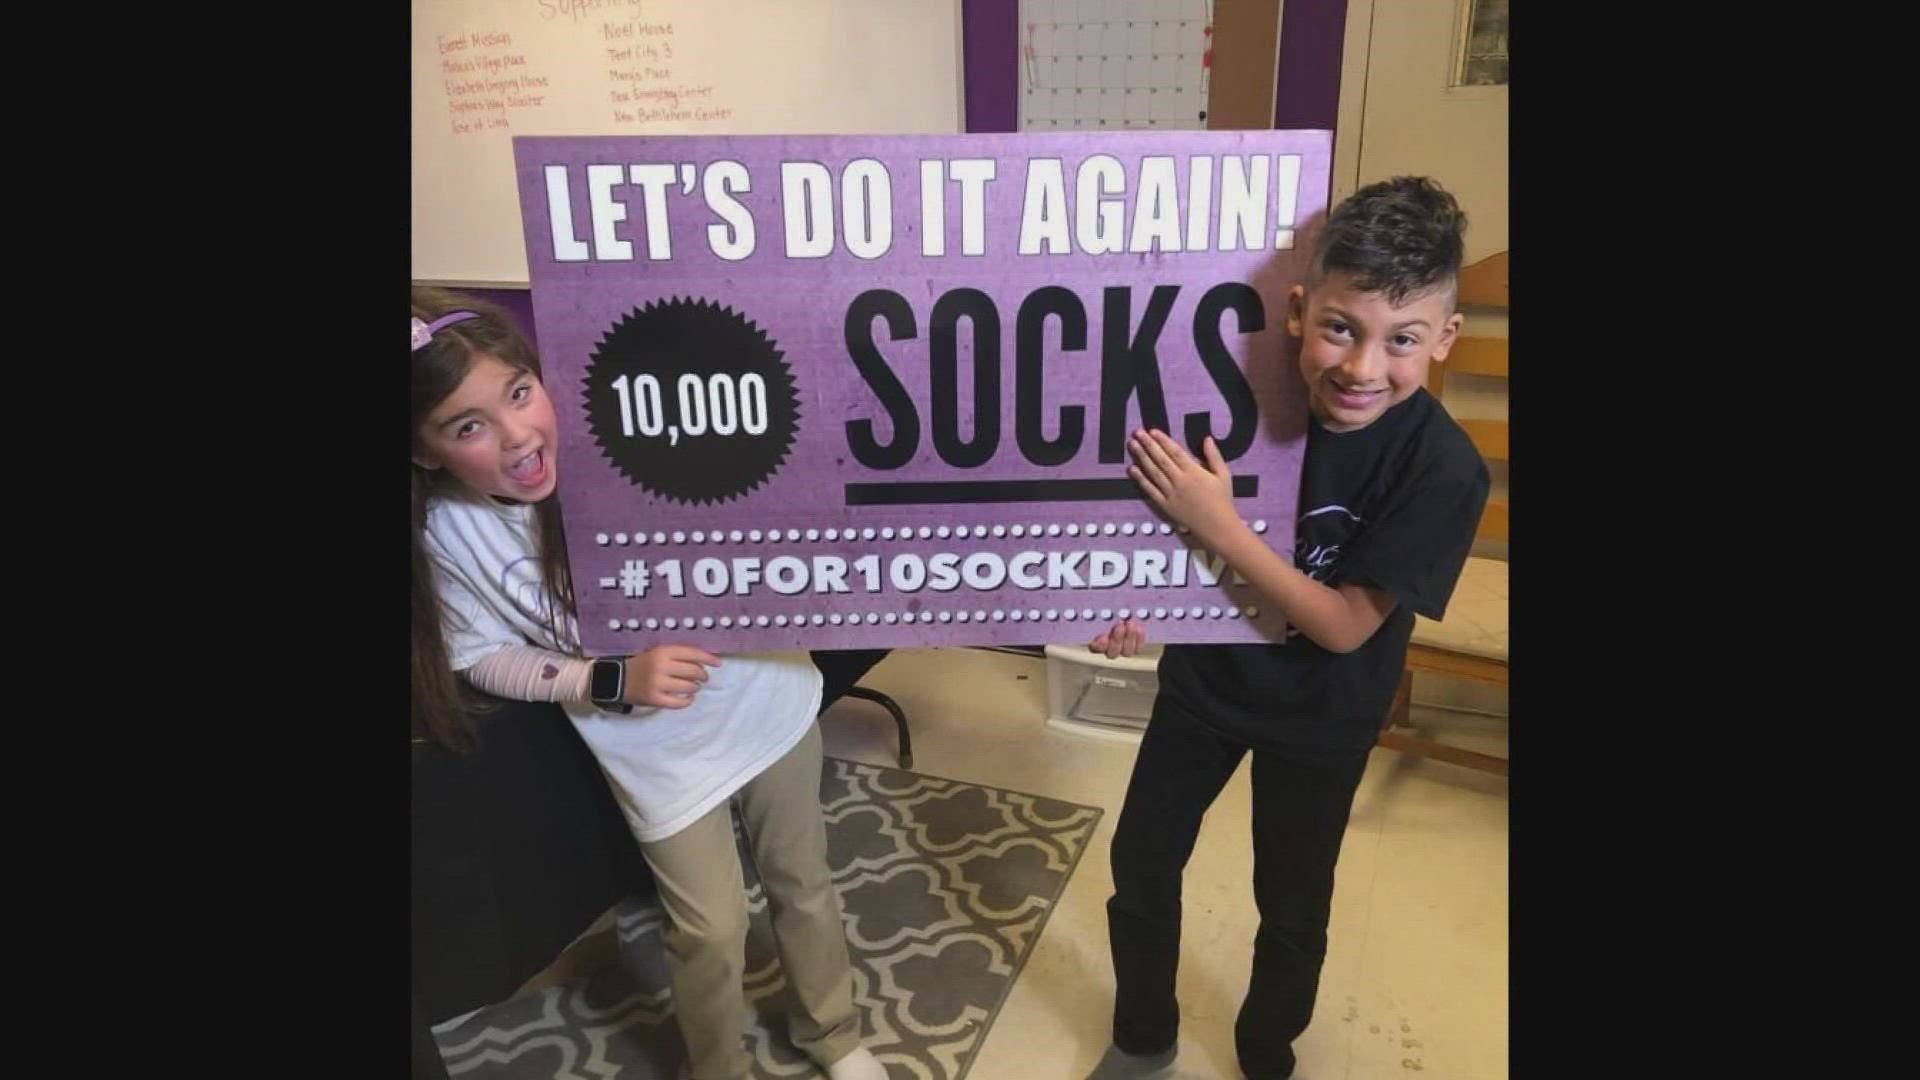 Dignity for Divas is leading a massive sock drive effort in hopes of preventing health issues in people experiencing homelessness.